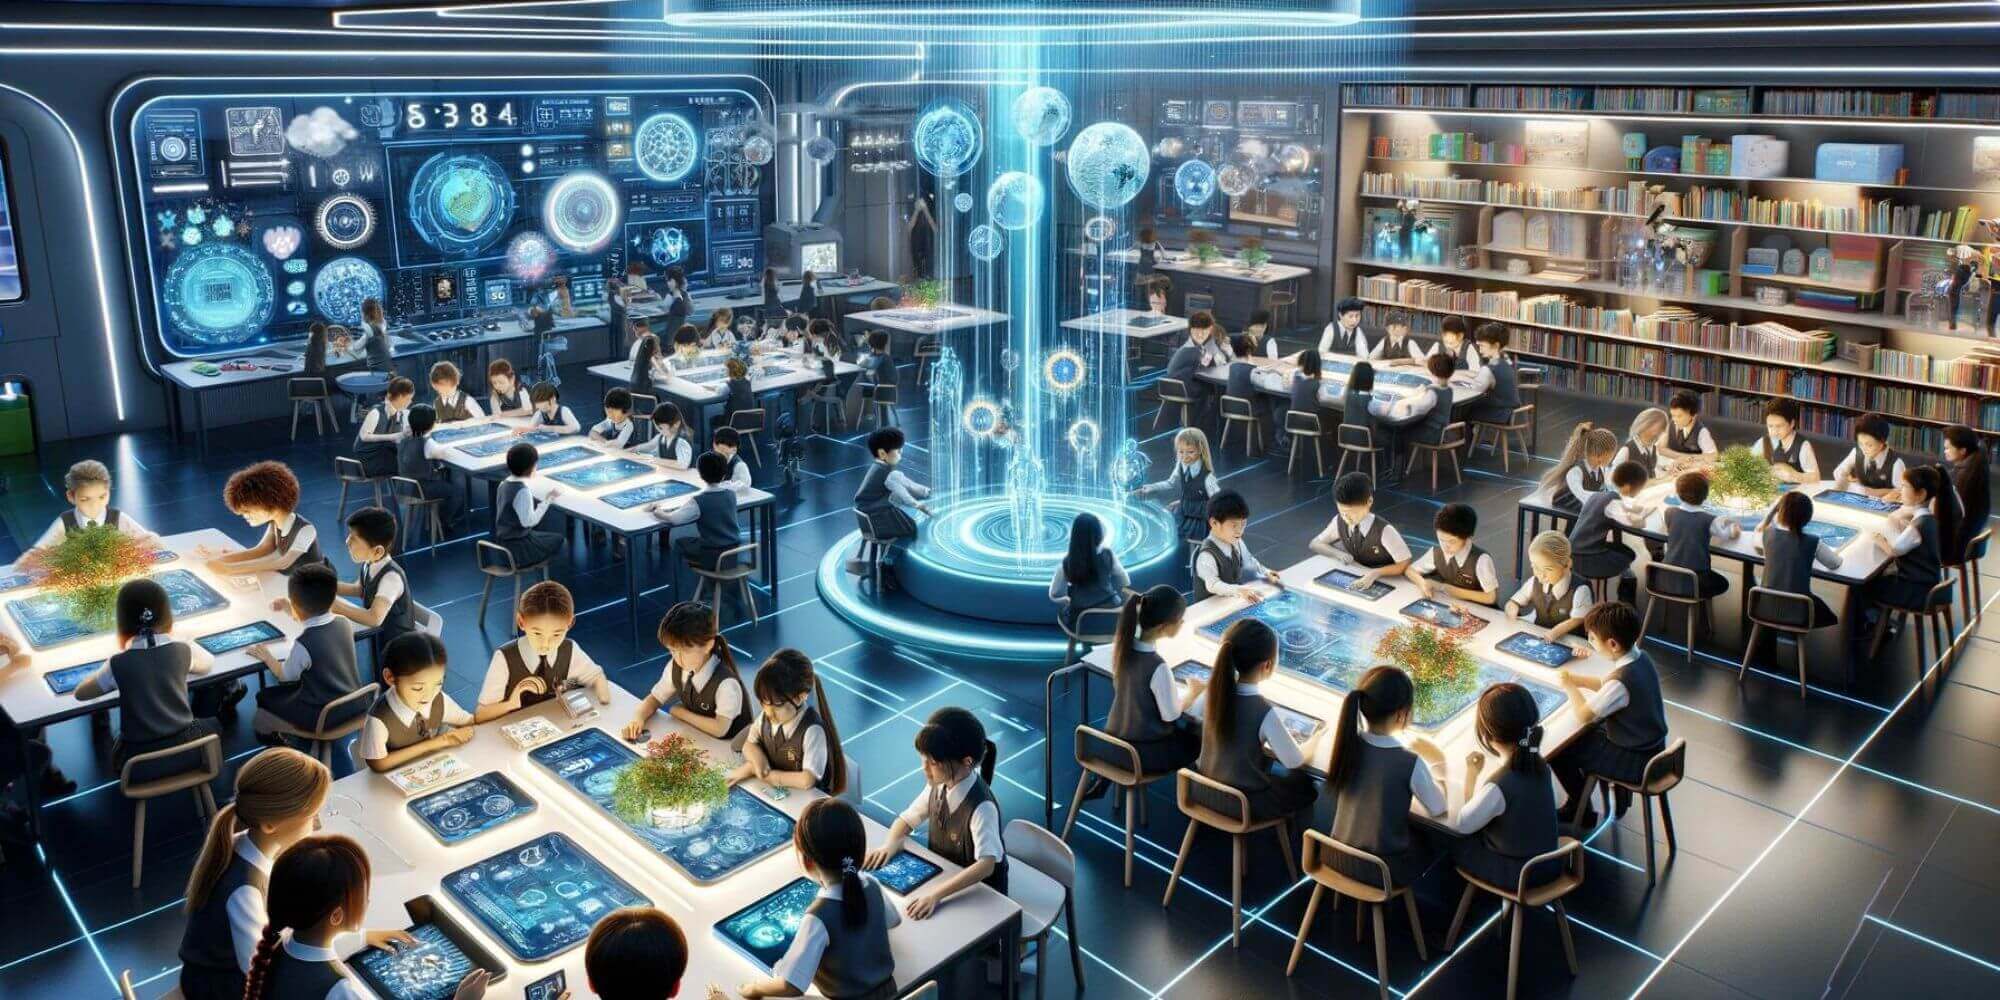 Future-proof career skills for students in school depicted in a modern collaborative workspace that appears like science fiction but is close to current reality.